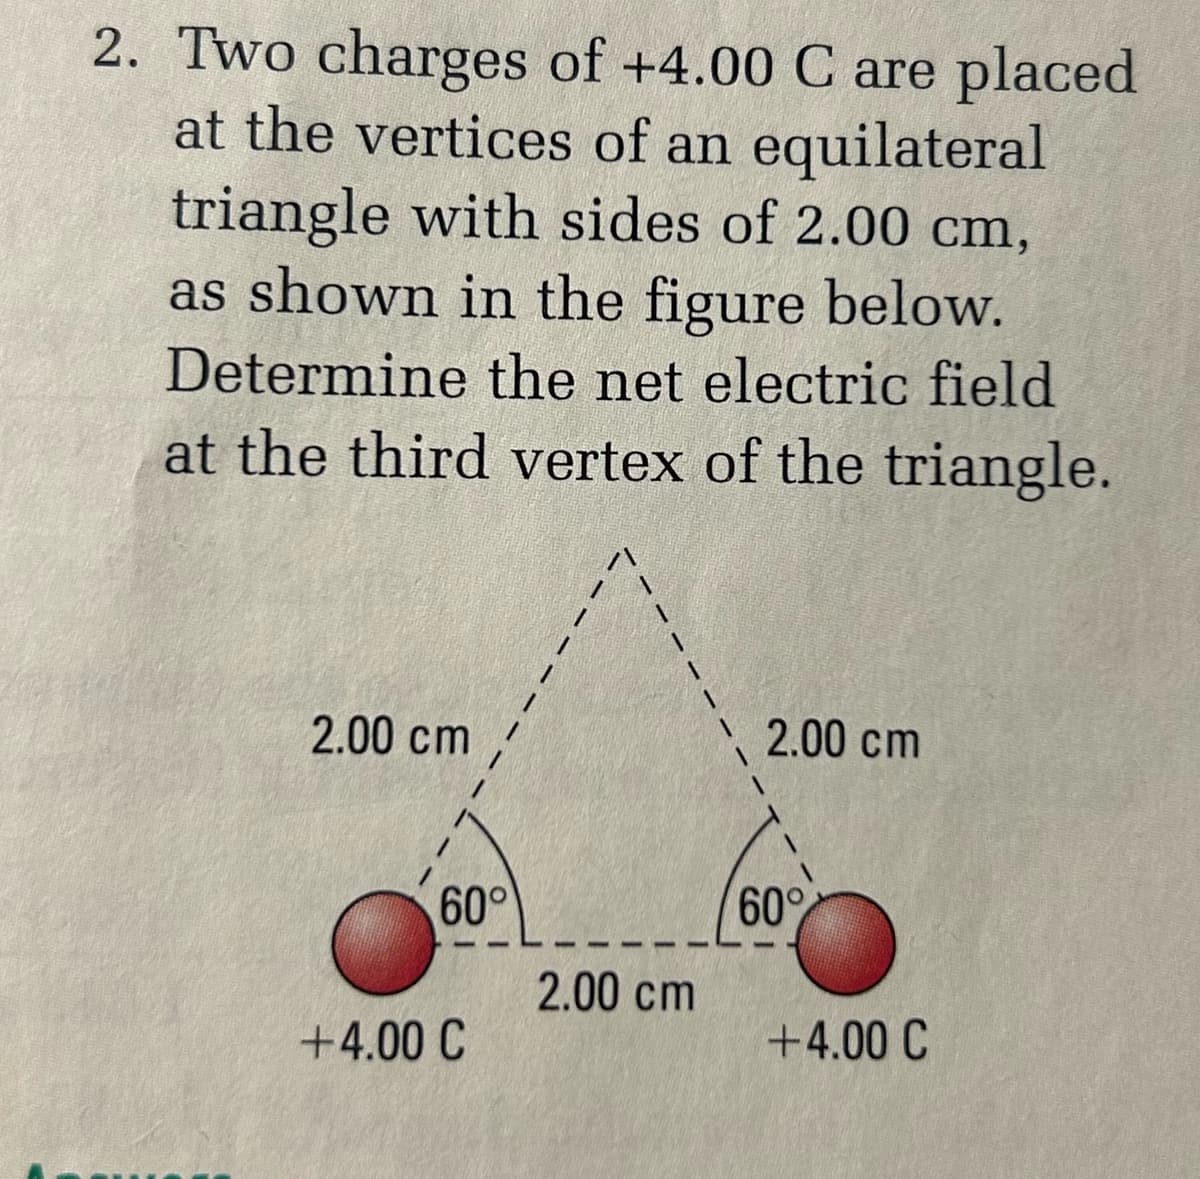 2. Two charges of +4.00 C are placed
at the vertices of an equilateral
triangle with sides of 2.00 cm,
as shown in the figure below.
Determine the net electric field
at the third vertex of the triangle.
2.00 cm
2.00 cm
60°
60%
2.00 cm
+4.00 C
+4.00 C